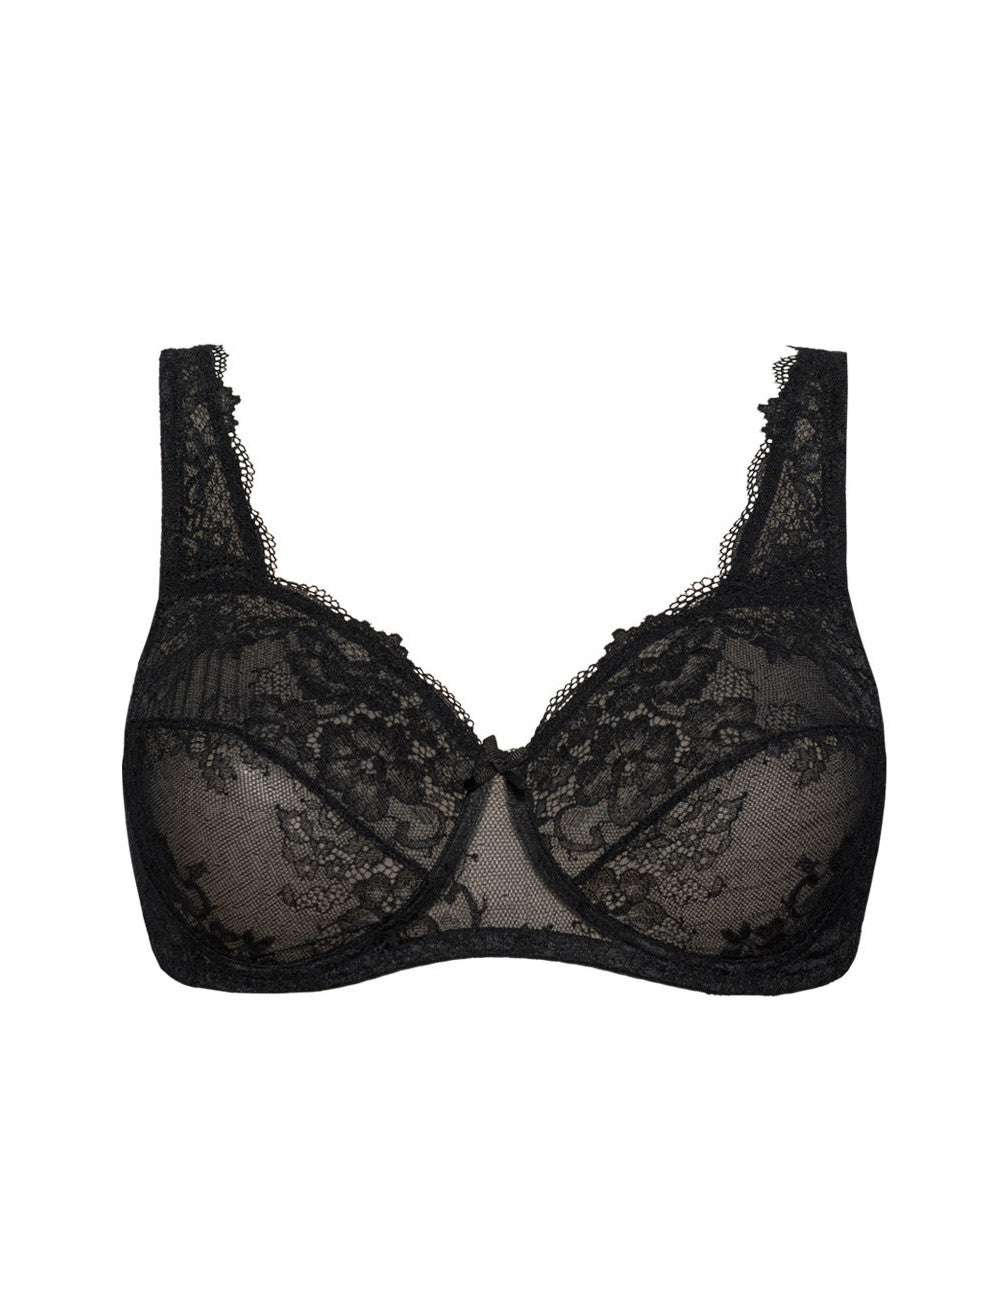 The Wonder Lace line of SIéLEI from Italy features an unpadded, wire-free, soft cup, lace bra. 